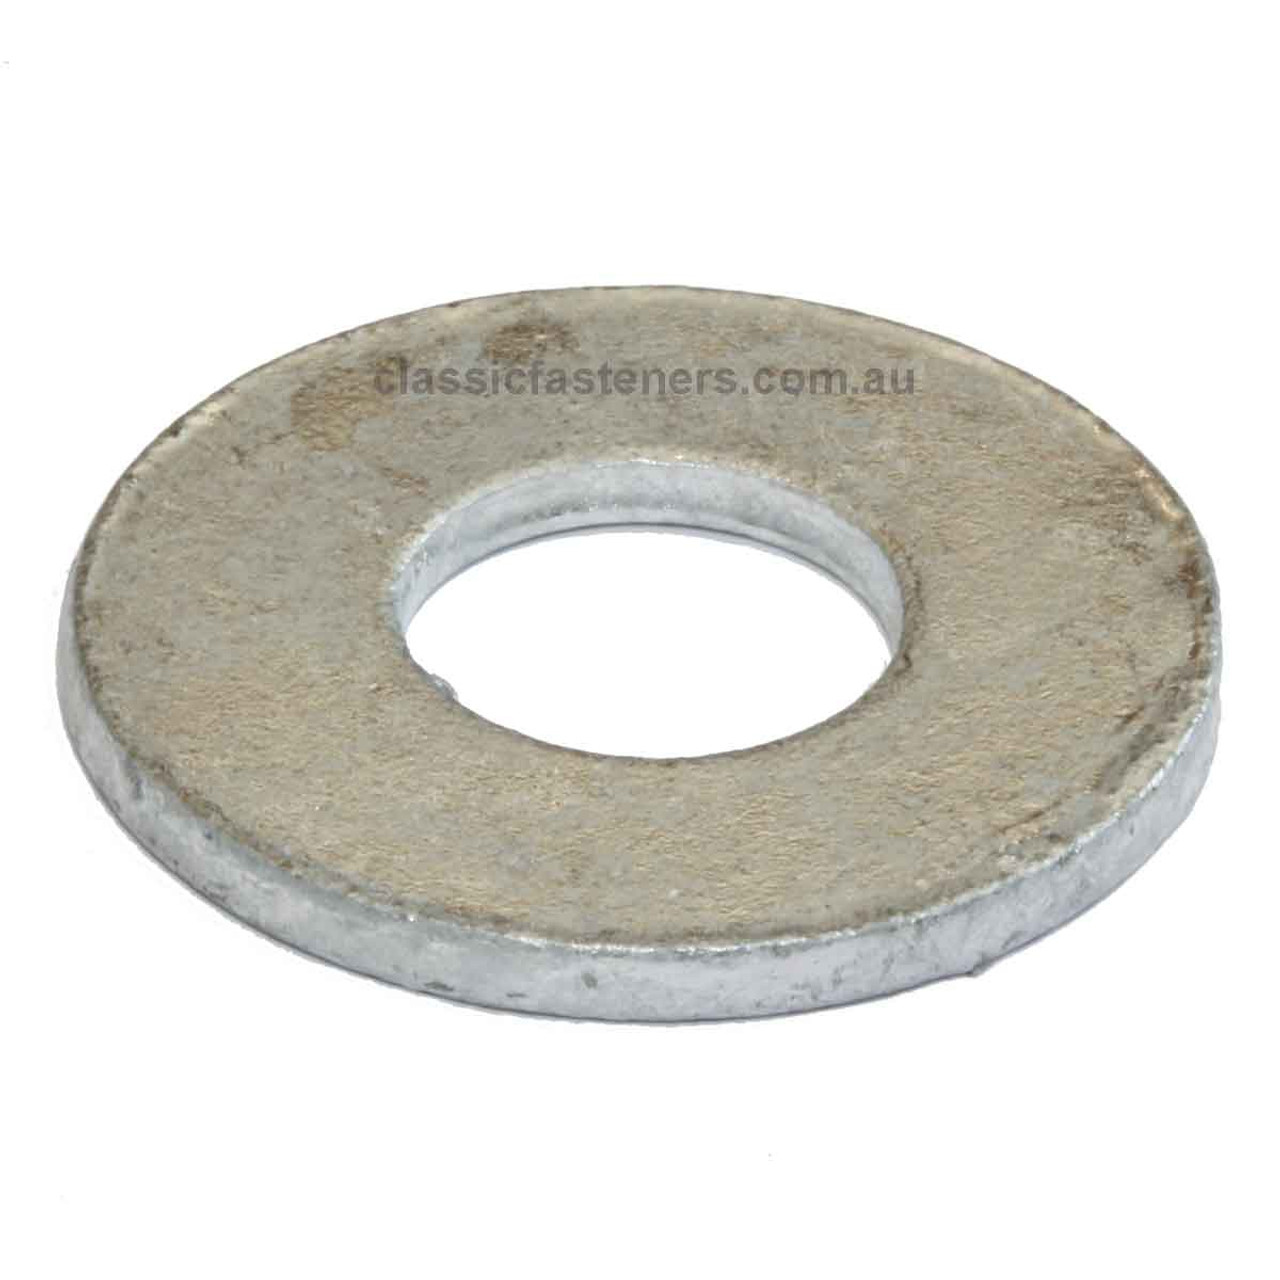 M12 Hot Dip Galvanised Flat Washer  - Qty 1